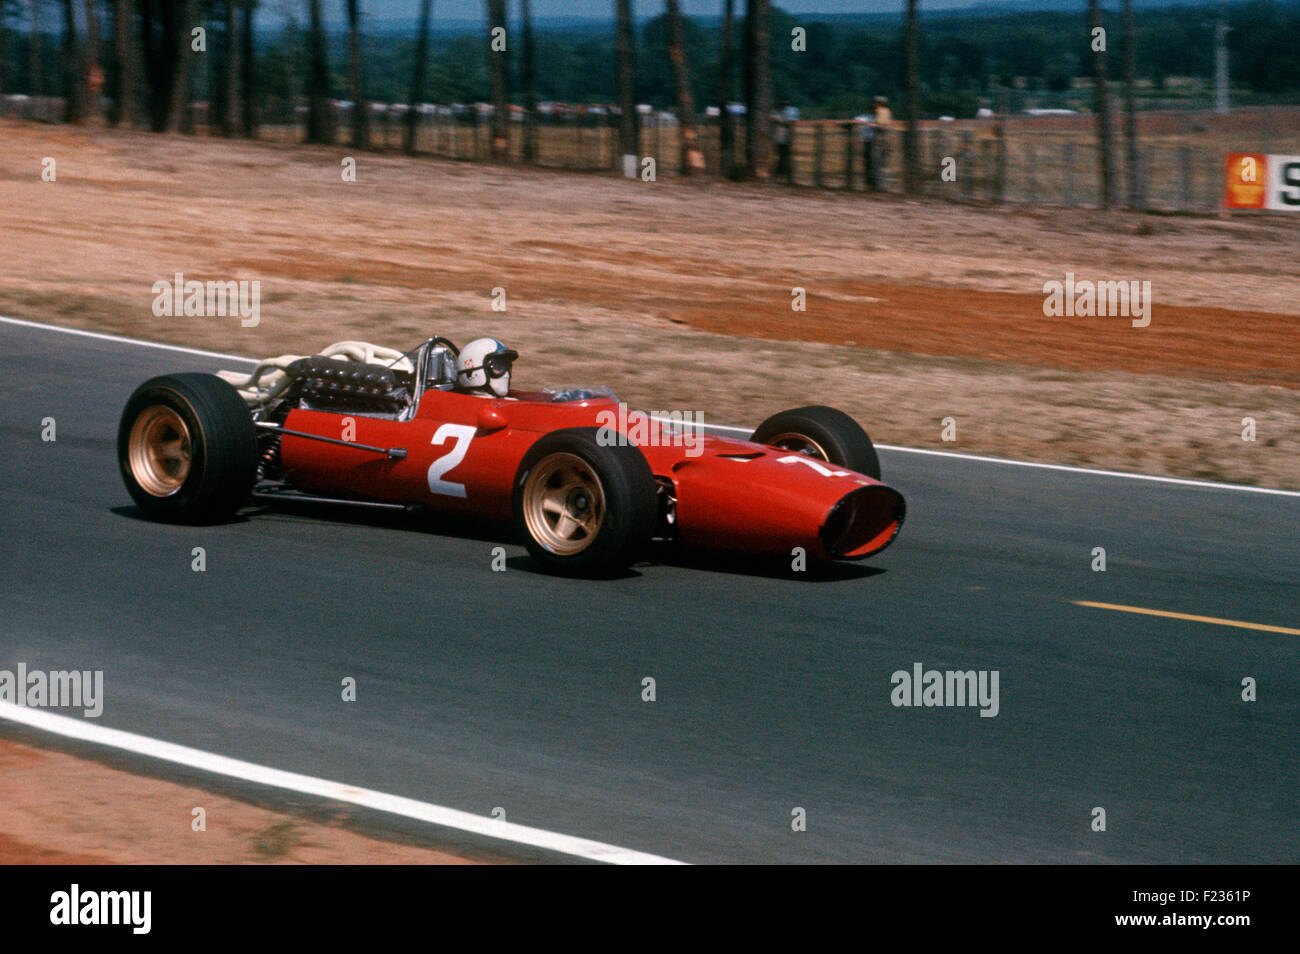 2 Chris Amon in his Ferrari 312 at the French GP on the Bugatti circuit at Le Mans - 2 July 1967 Stock Photo